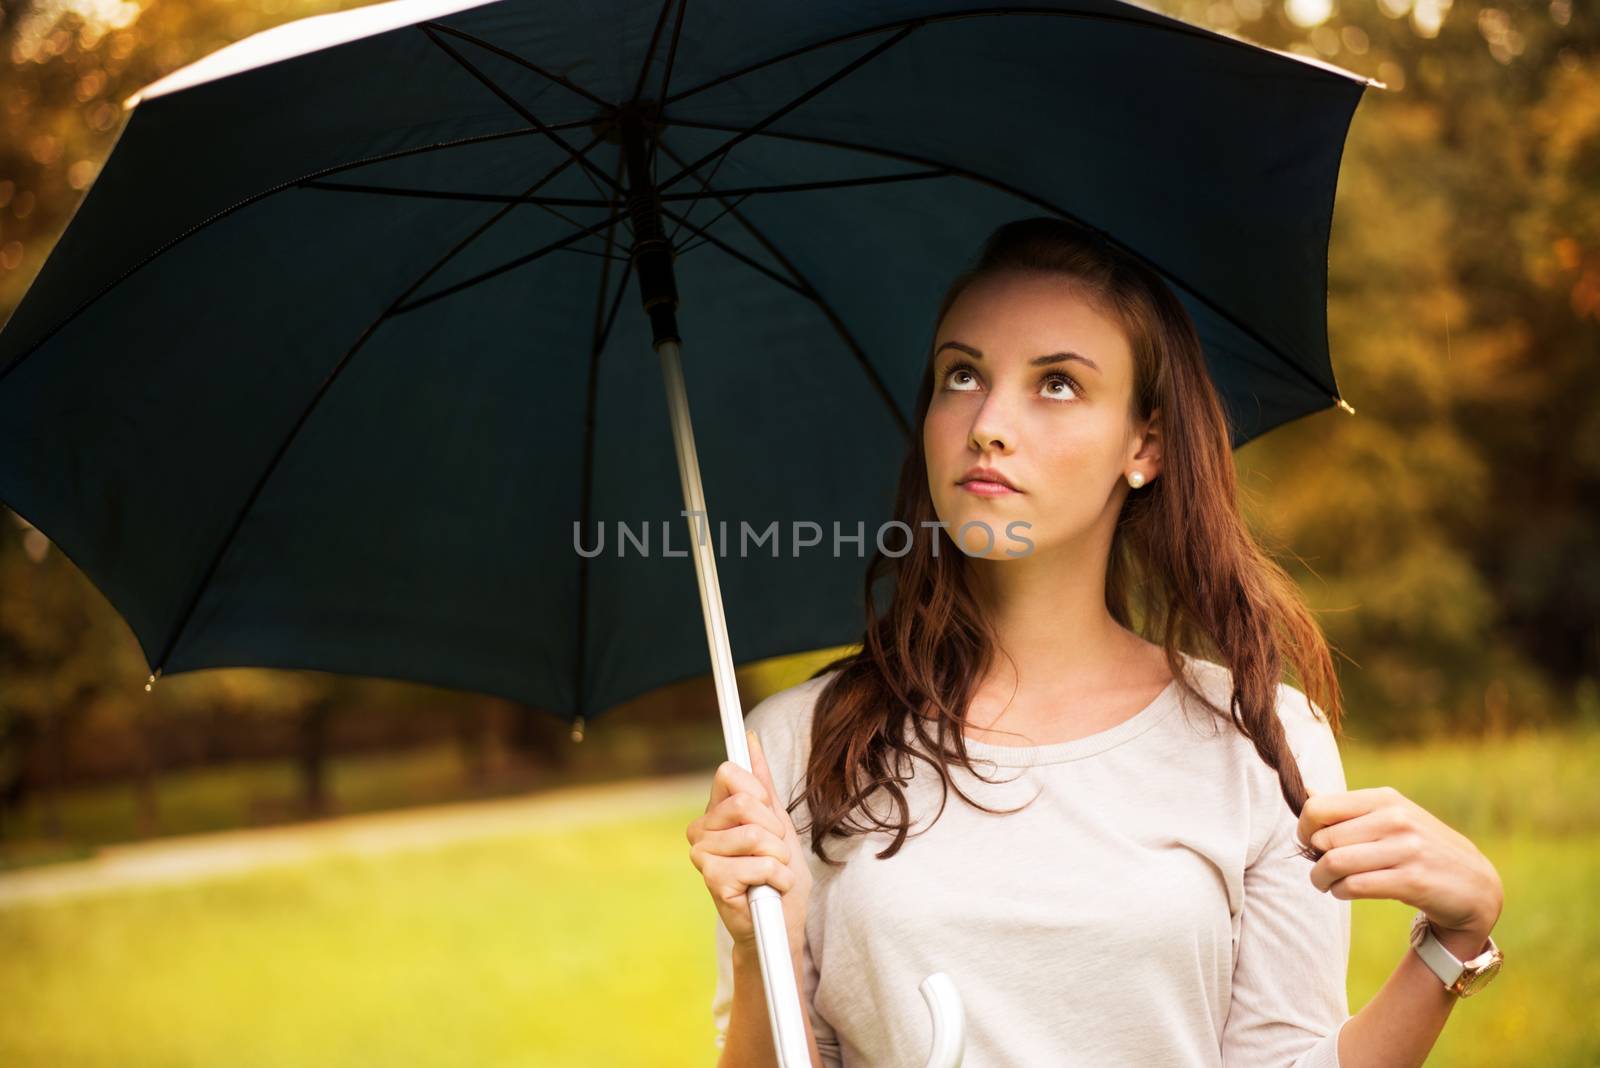 Portrait of young beautiful woman walking in rainy autumn park with umbrella.